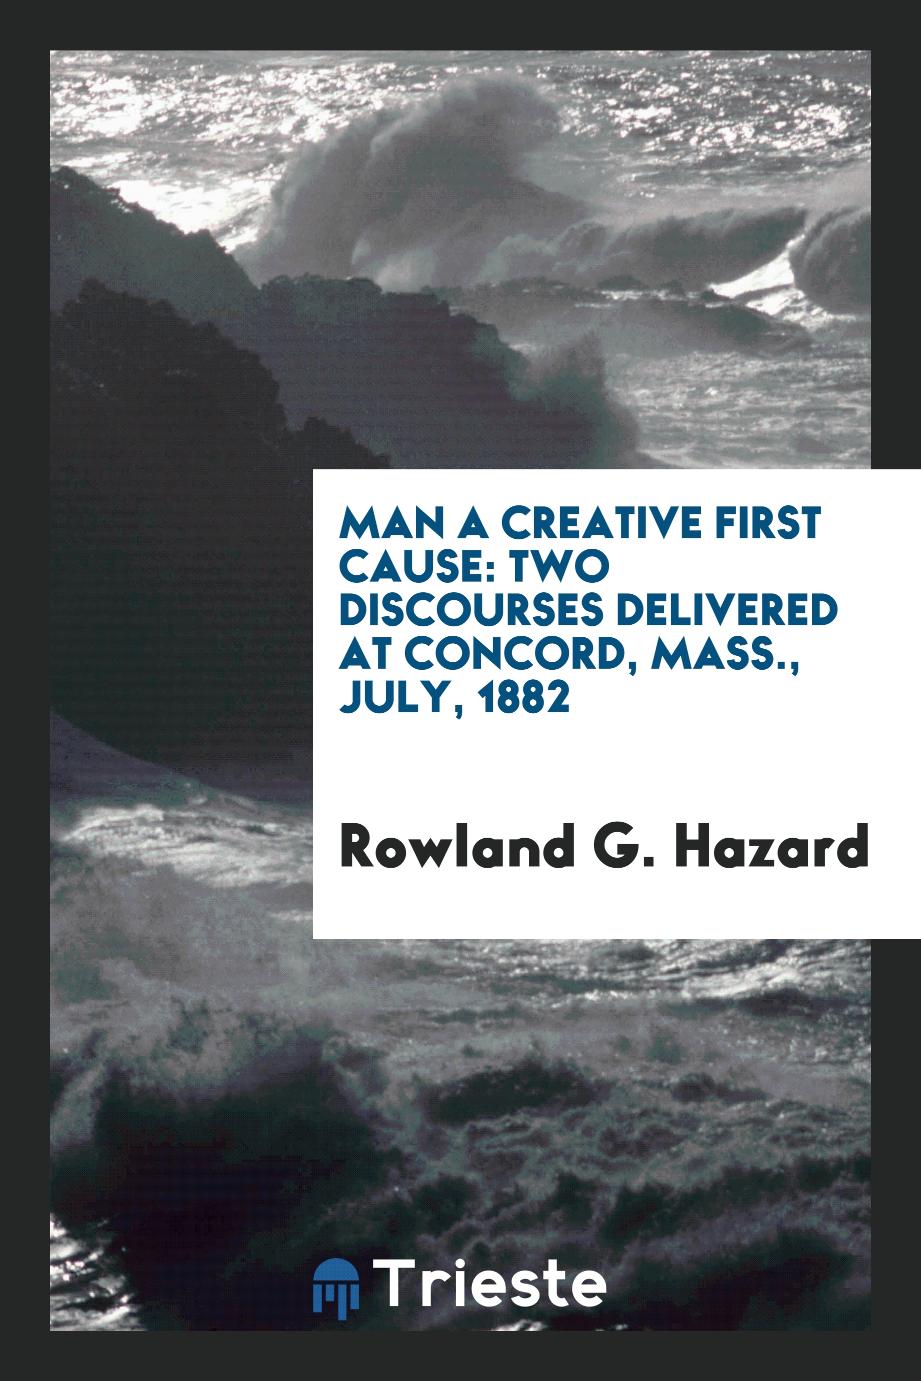 Man a Creative First Cause: Two Discourses Delivered at Concord, Mass., July, 1882